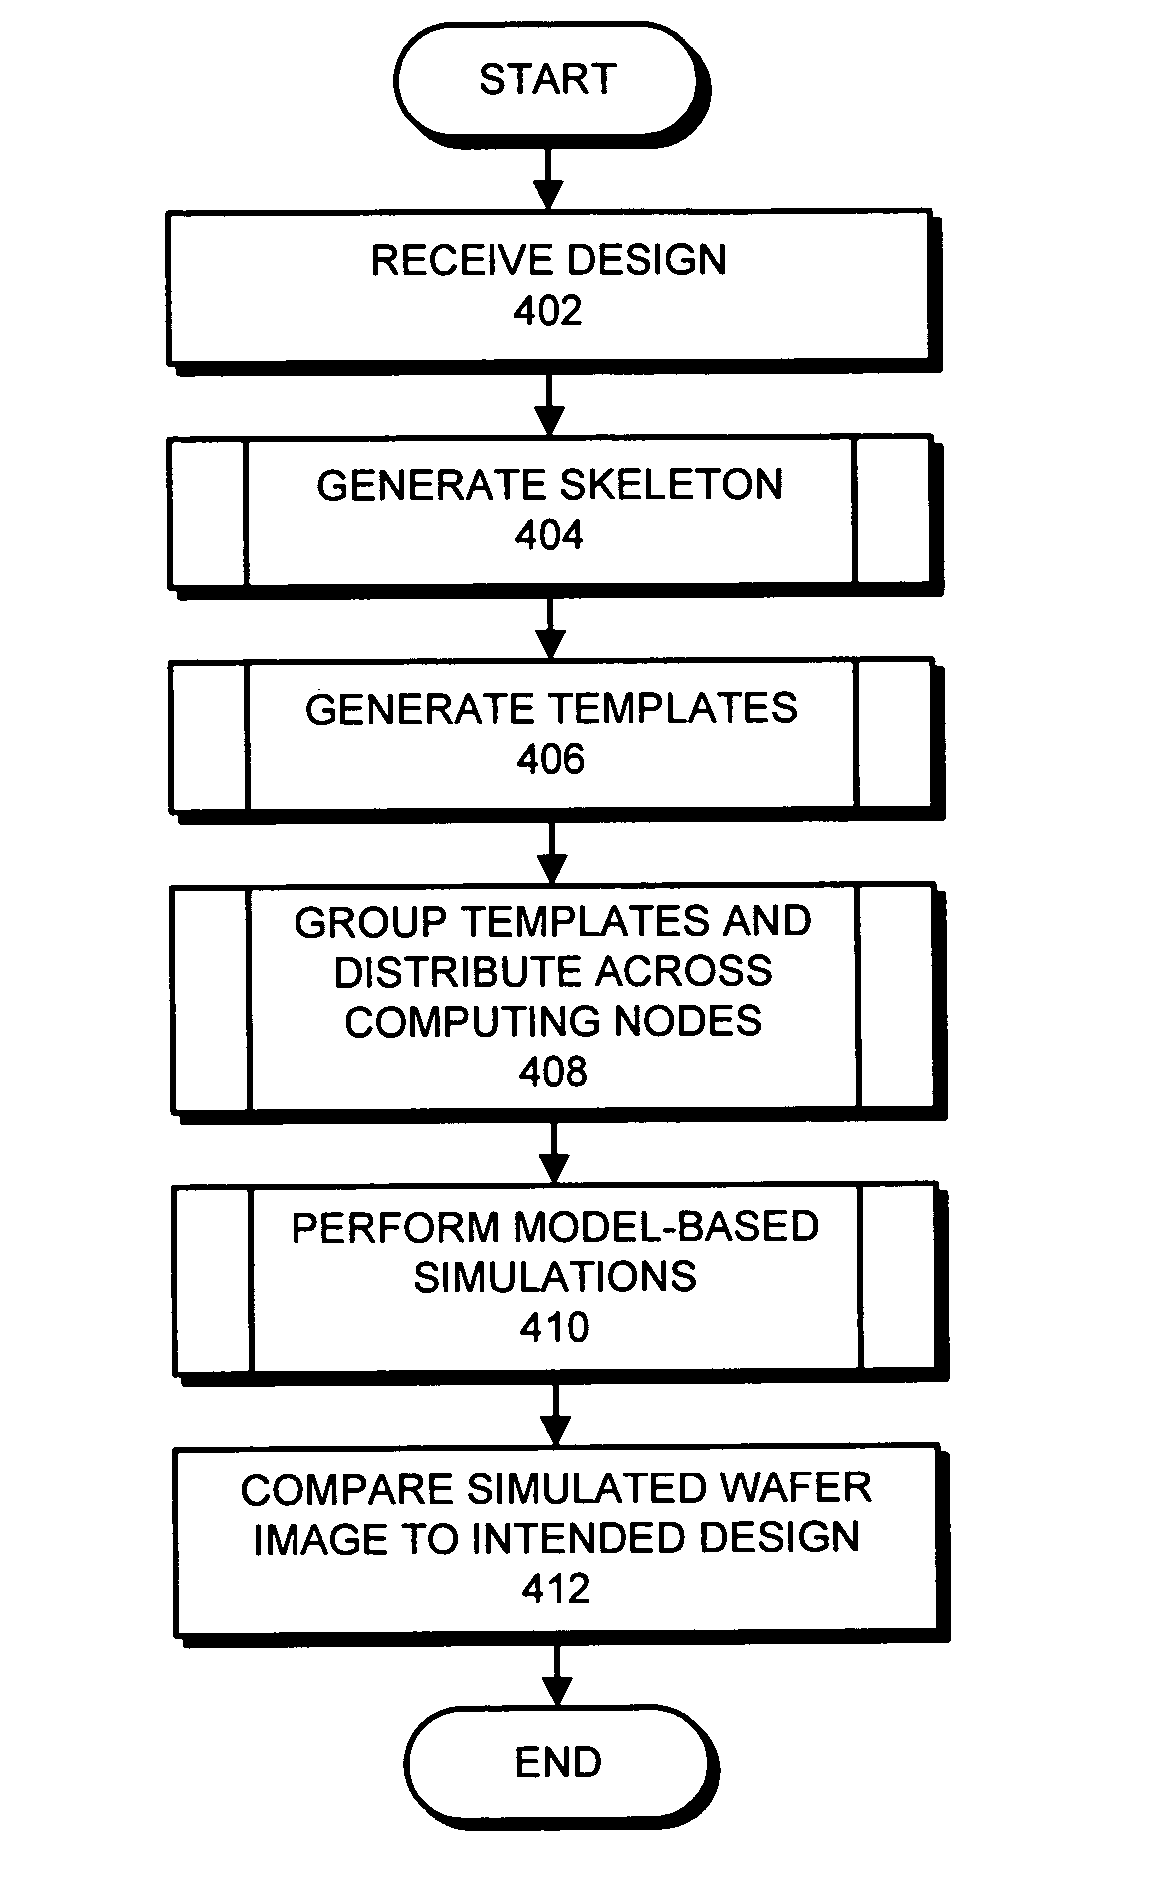 Distributed hierarchical partitioning framework for verifying a simulated wafer image